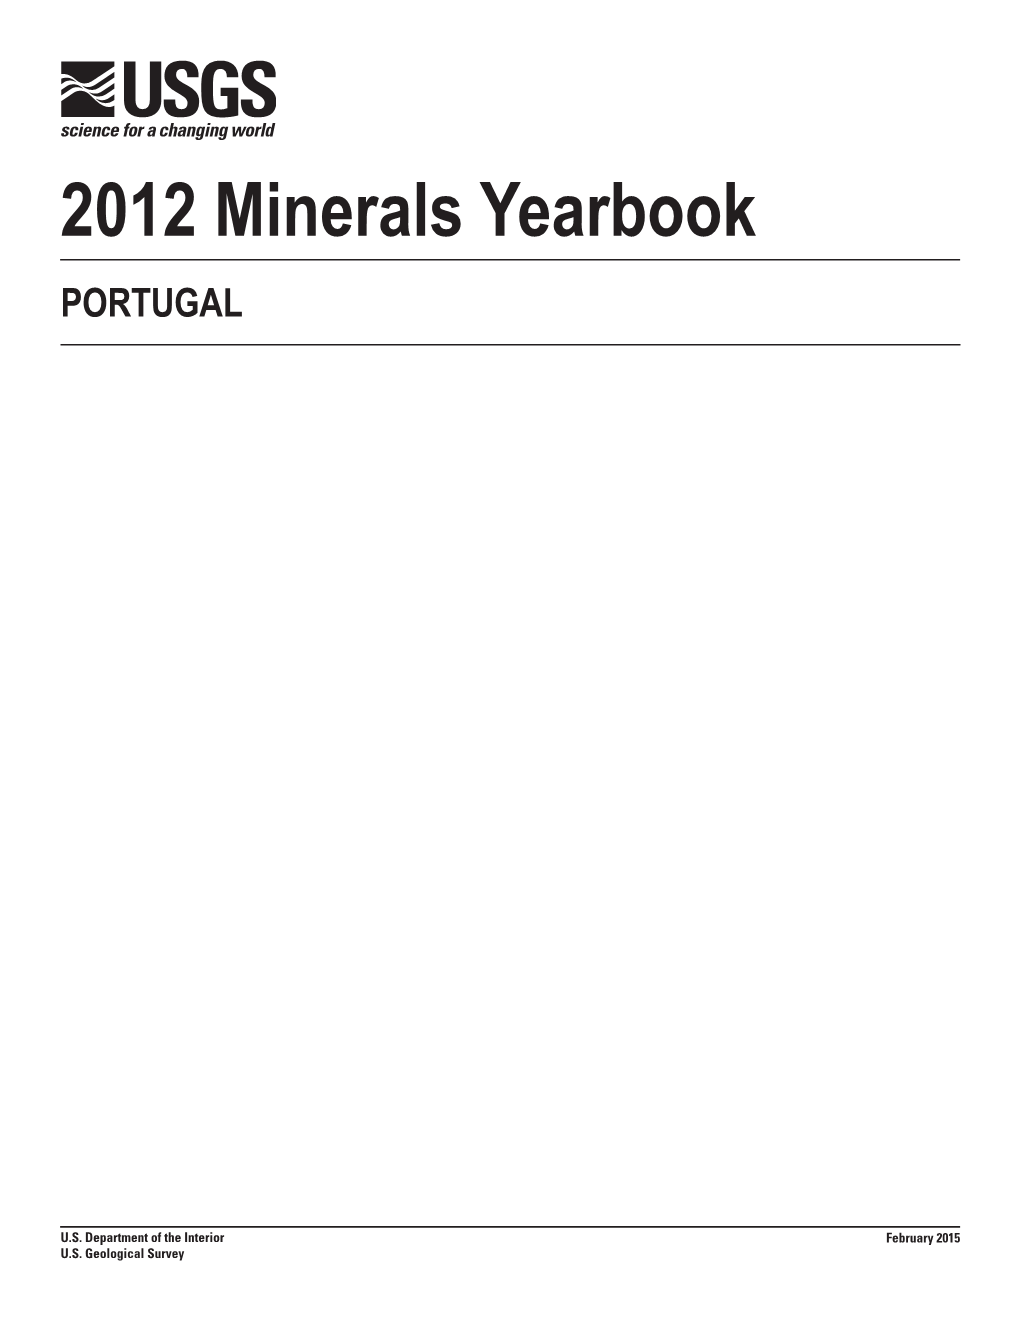 The Mineral Industry of Portugal in 2012